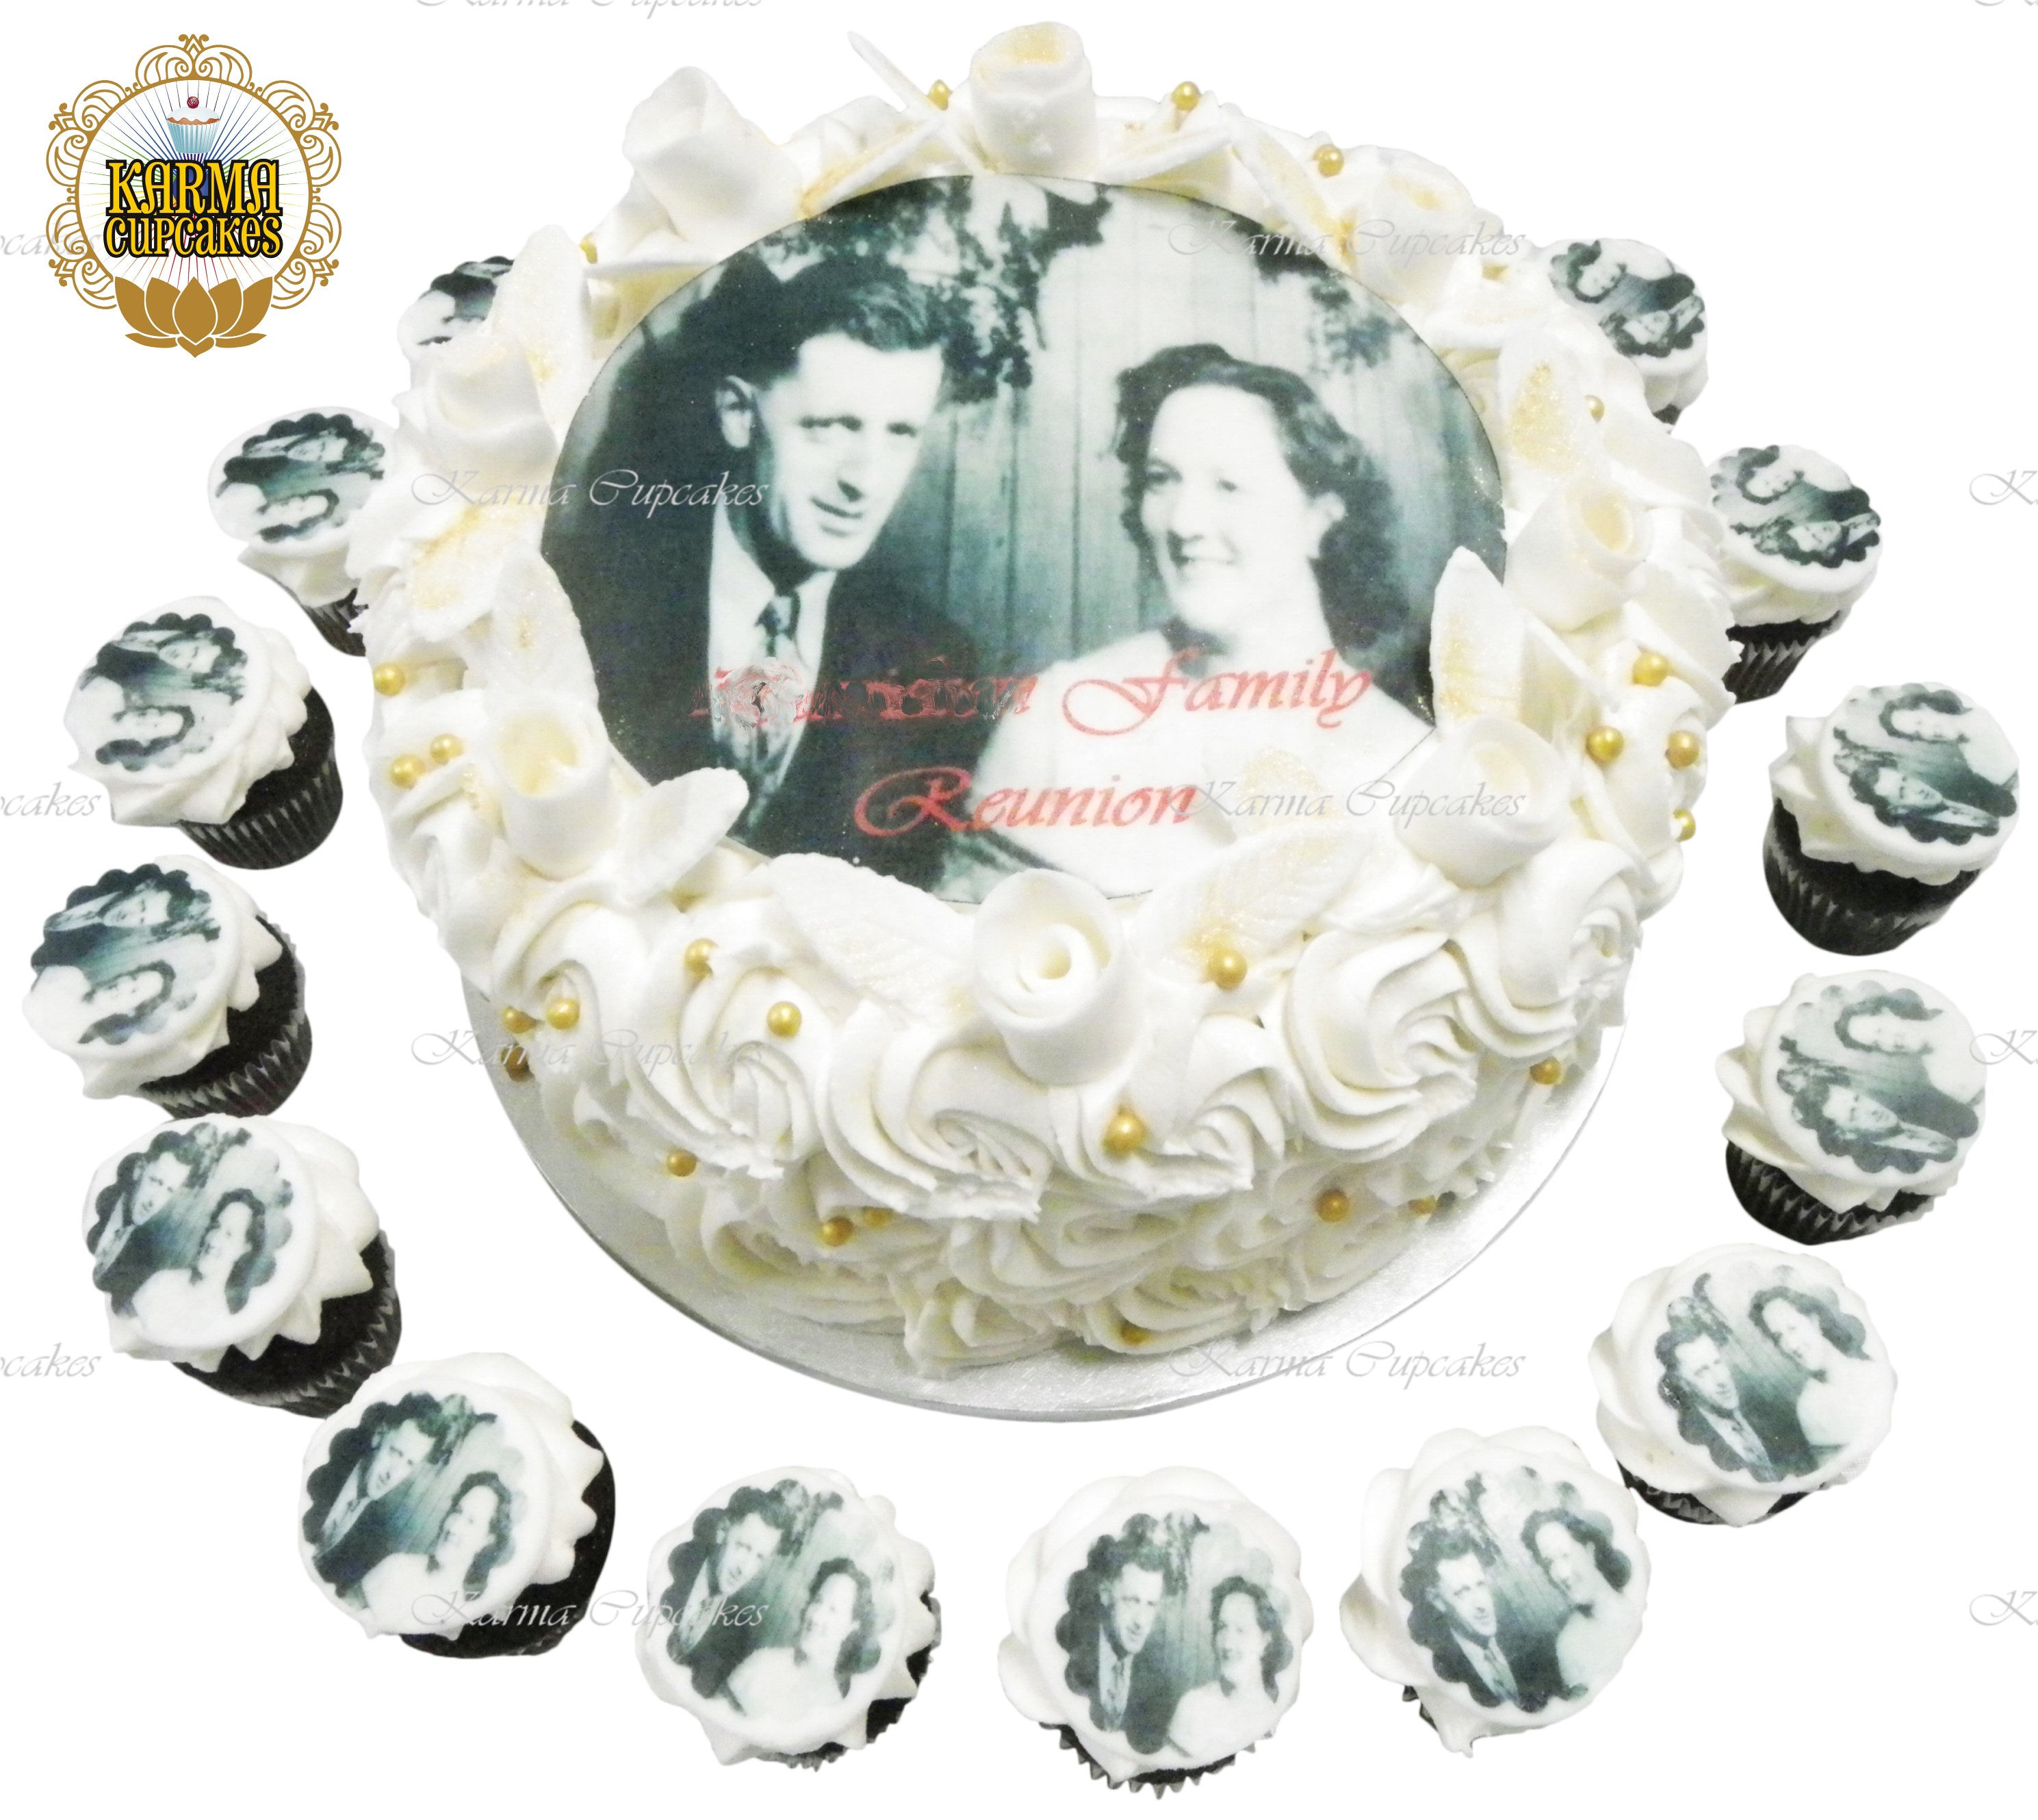 Family Reunion Cake with Edible Image